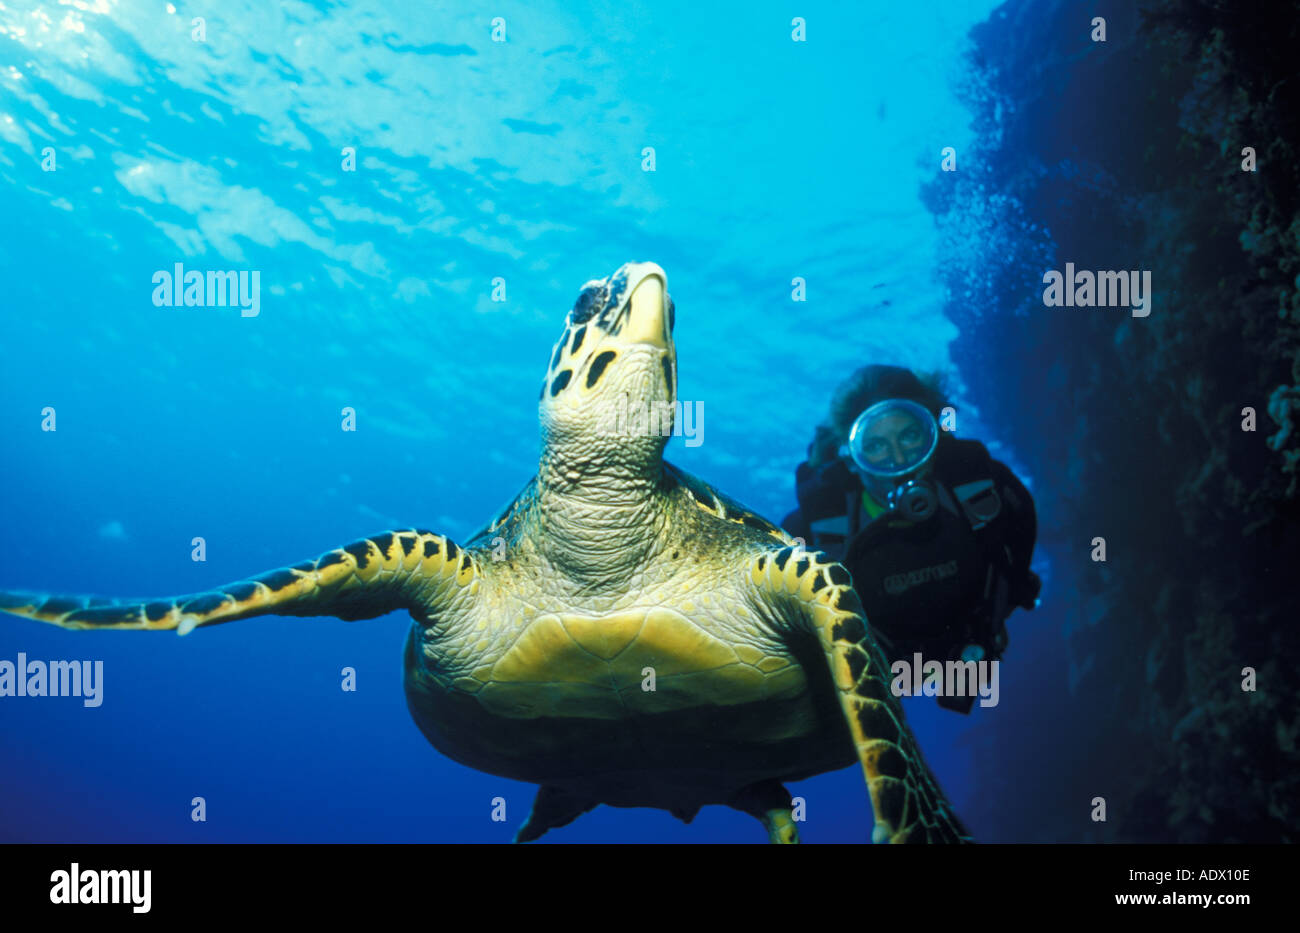 Turtle swimming in sea with person in scuba diving suit in background, low angle view Stock Photo